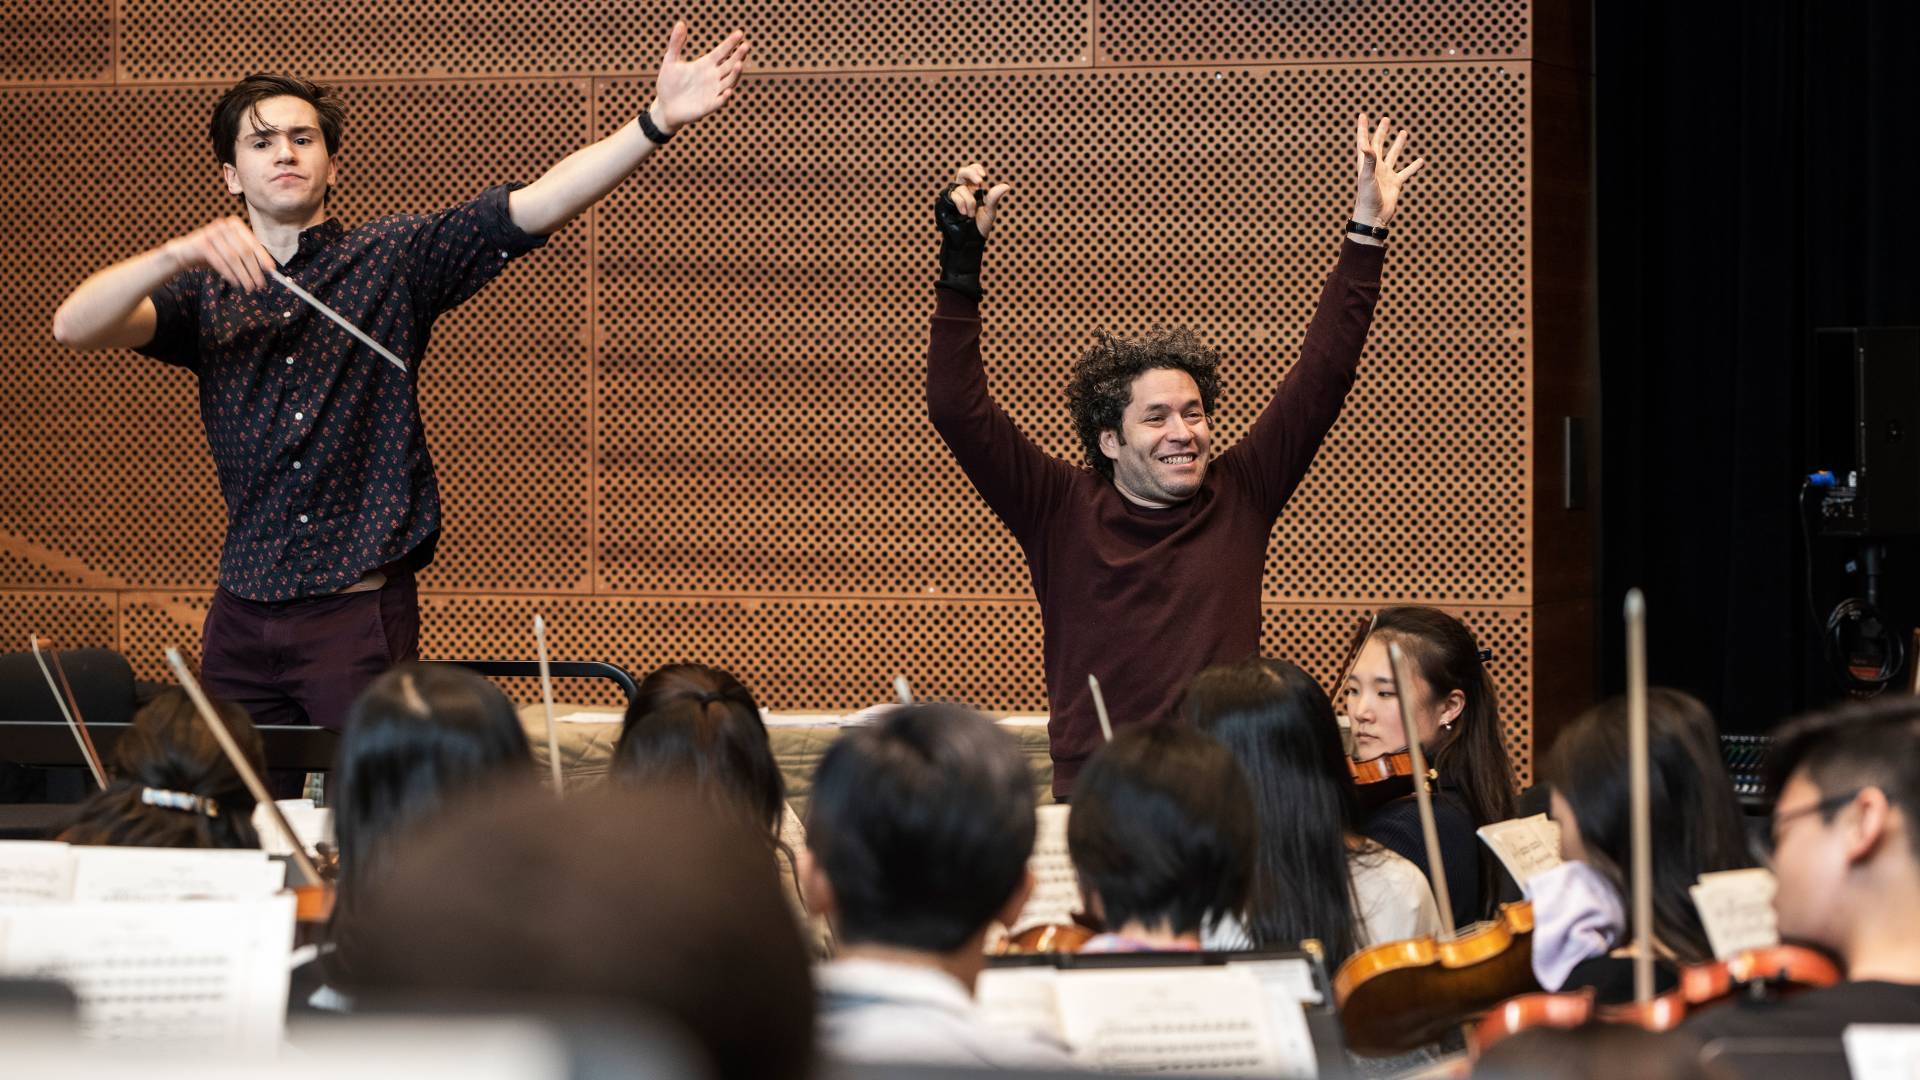 L.A. Philharmonic conductor Gustavo Dudamel and wife file for